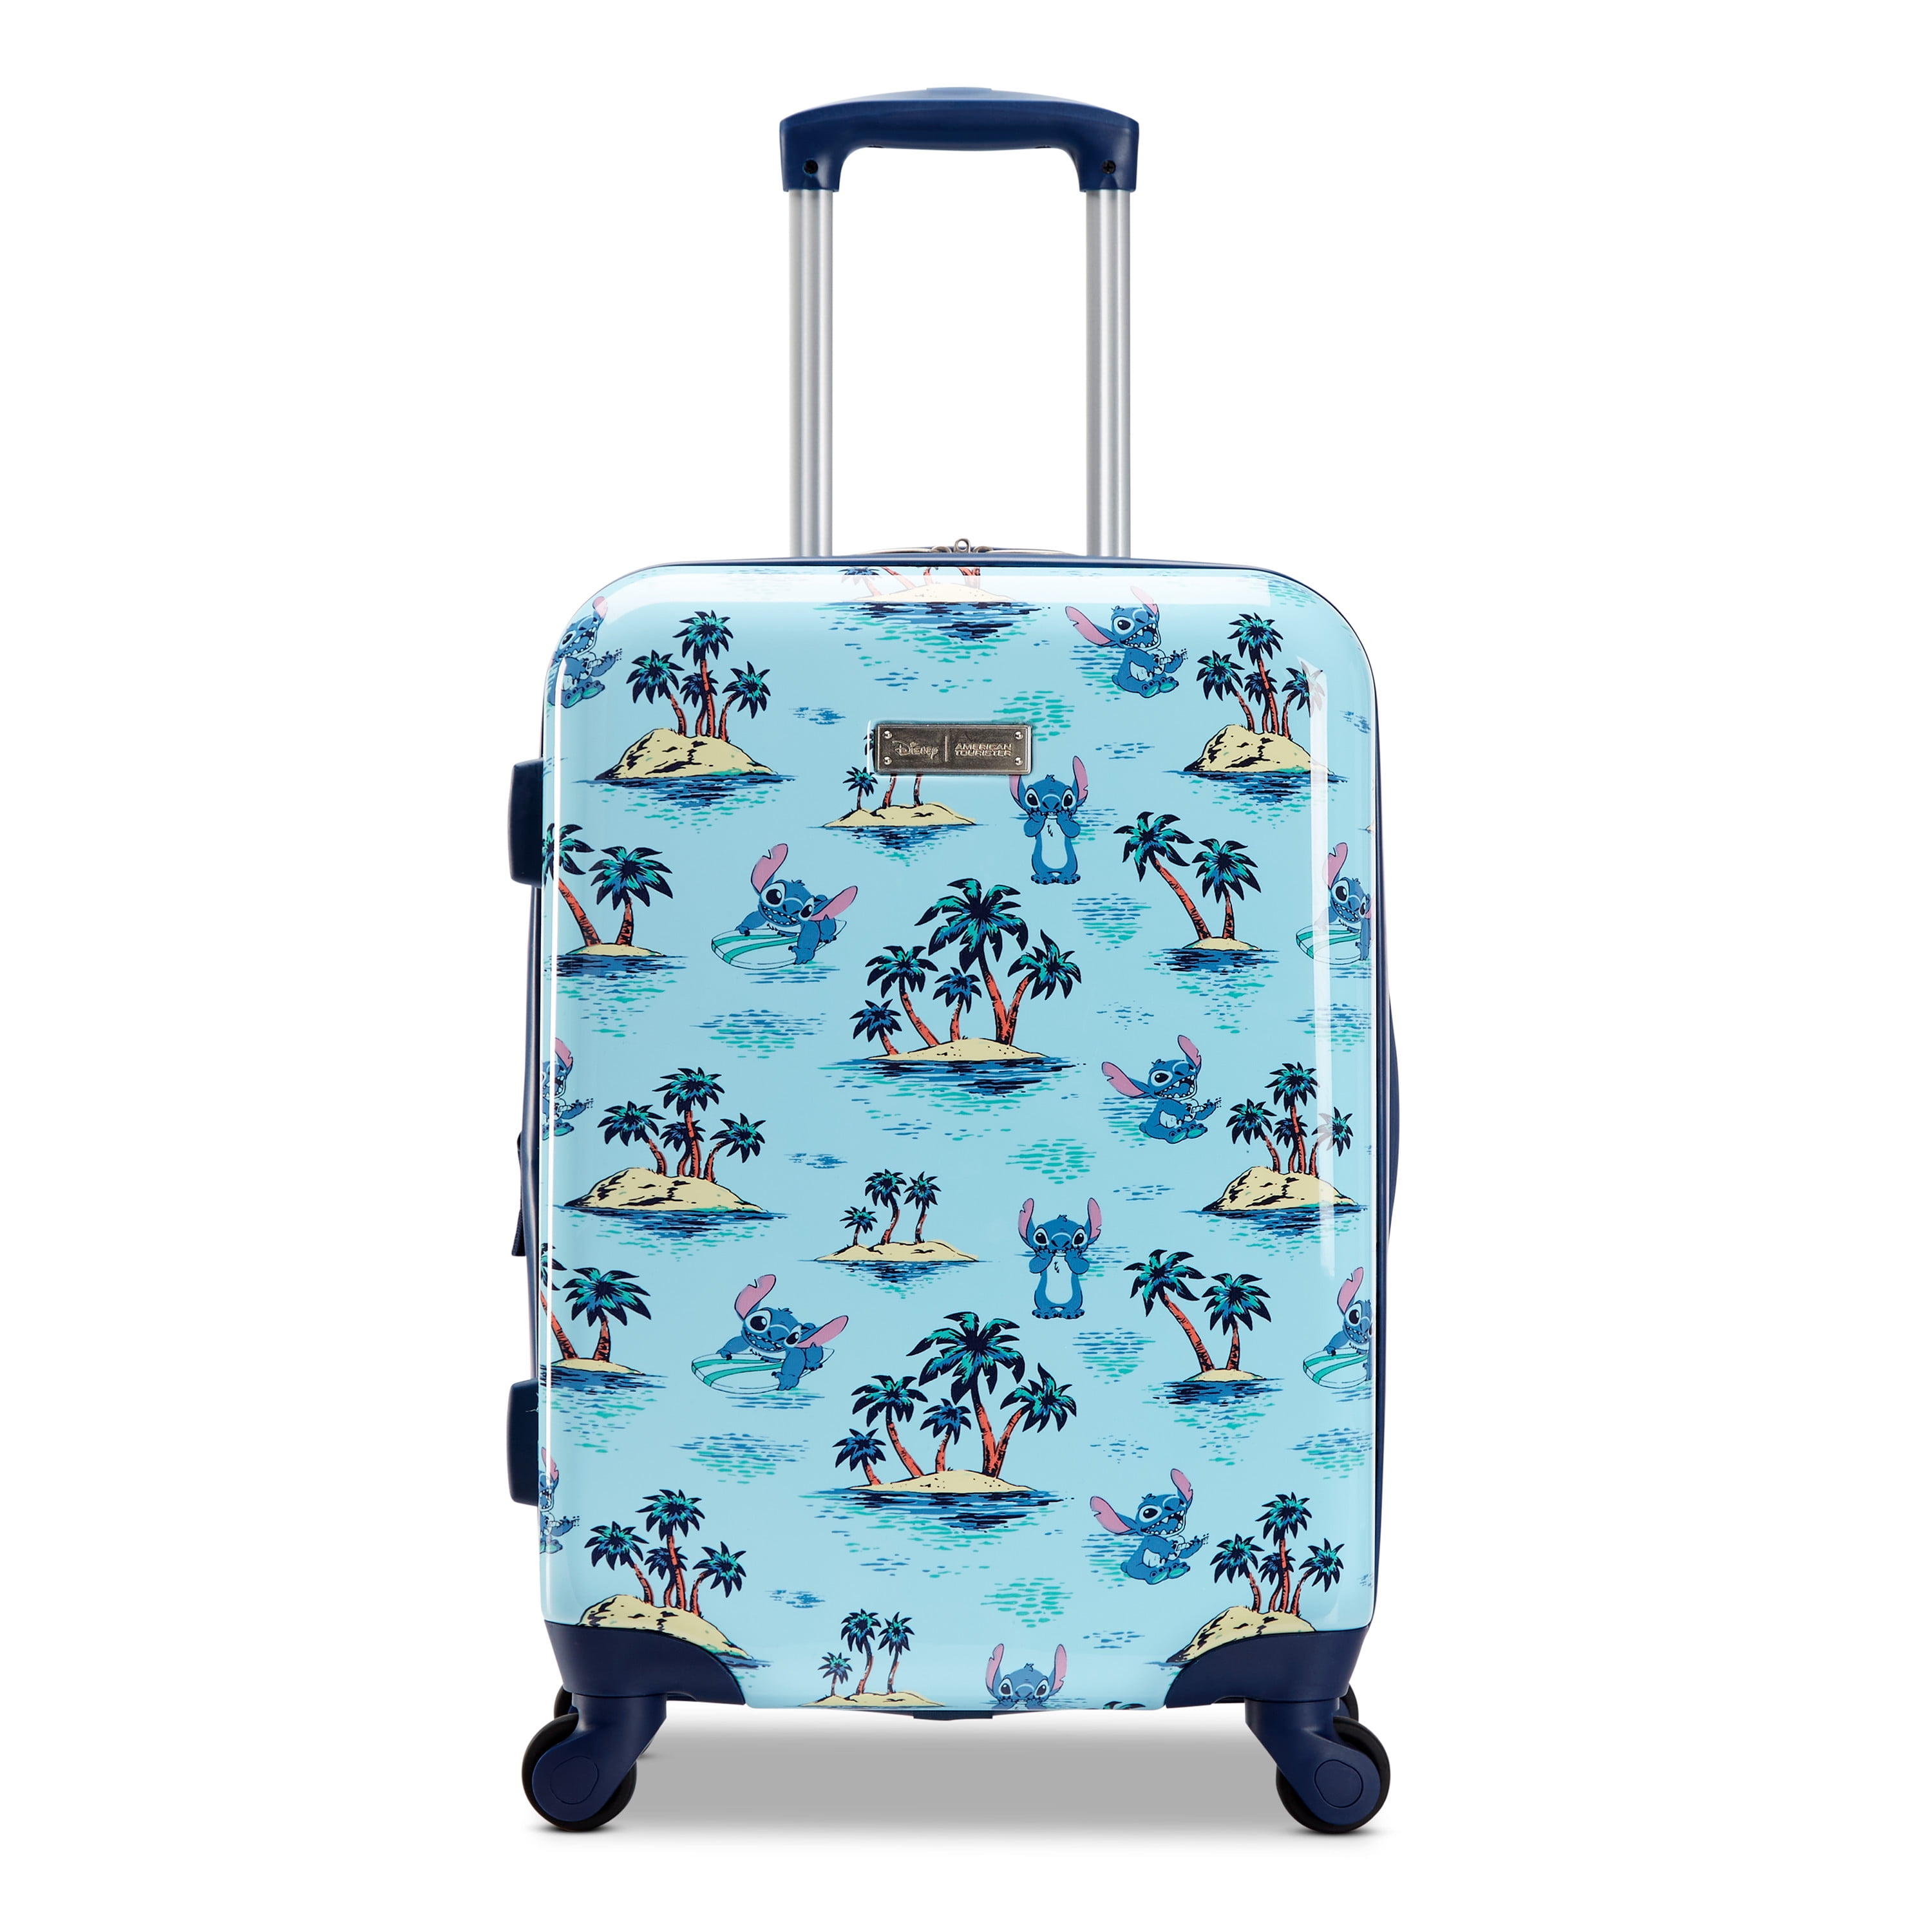 American Tourister 20 in All Ages Hardside Carry-on Spinner Luggage - Stitch